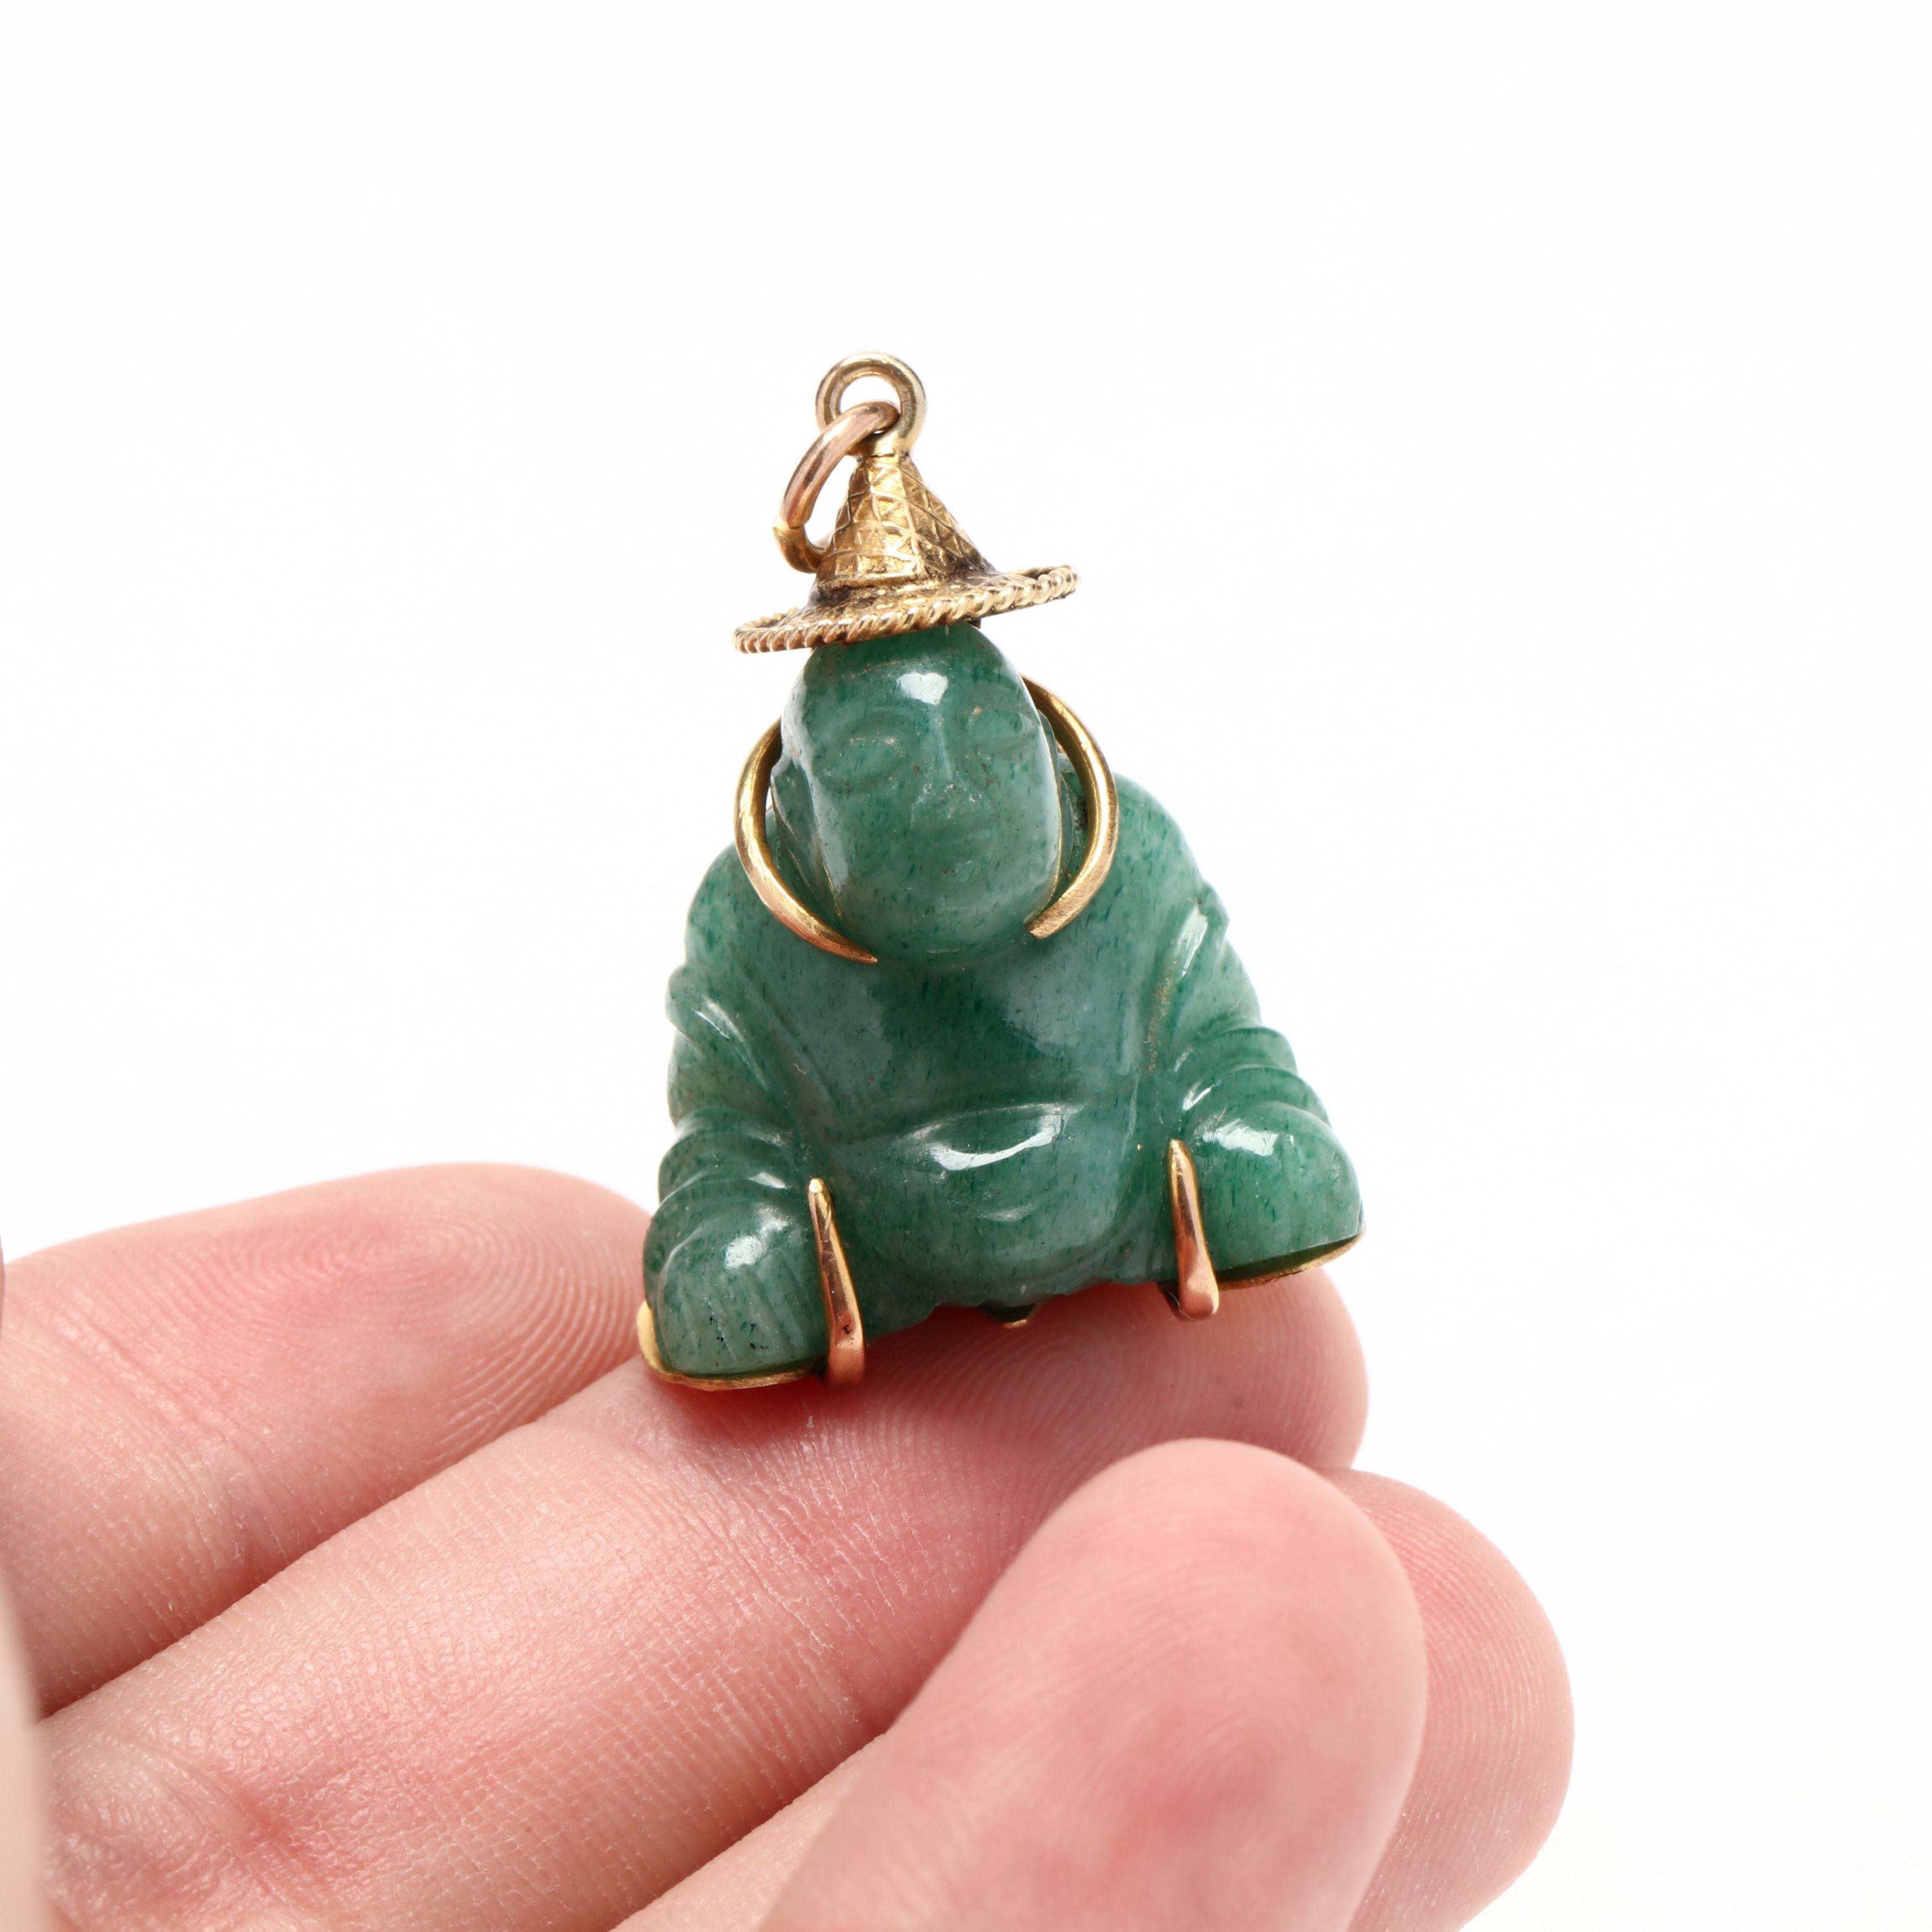 A vintage 14 karat yellow gold carved aventurine quartz buddha charm. This charm features a carved green aventurine quartz stone in a buddha motif with an engraved mounting and hat.



Length: 1 1/4 in.



Width: 7/8 in.



Weight: 6.4 dwts.